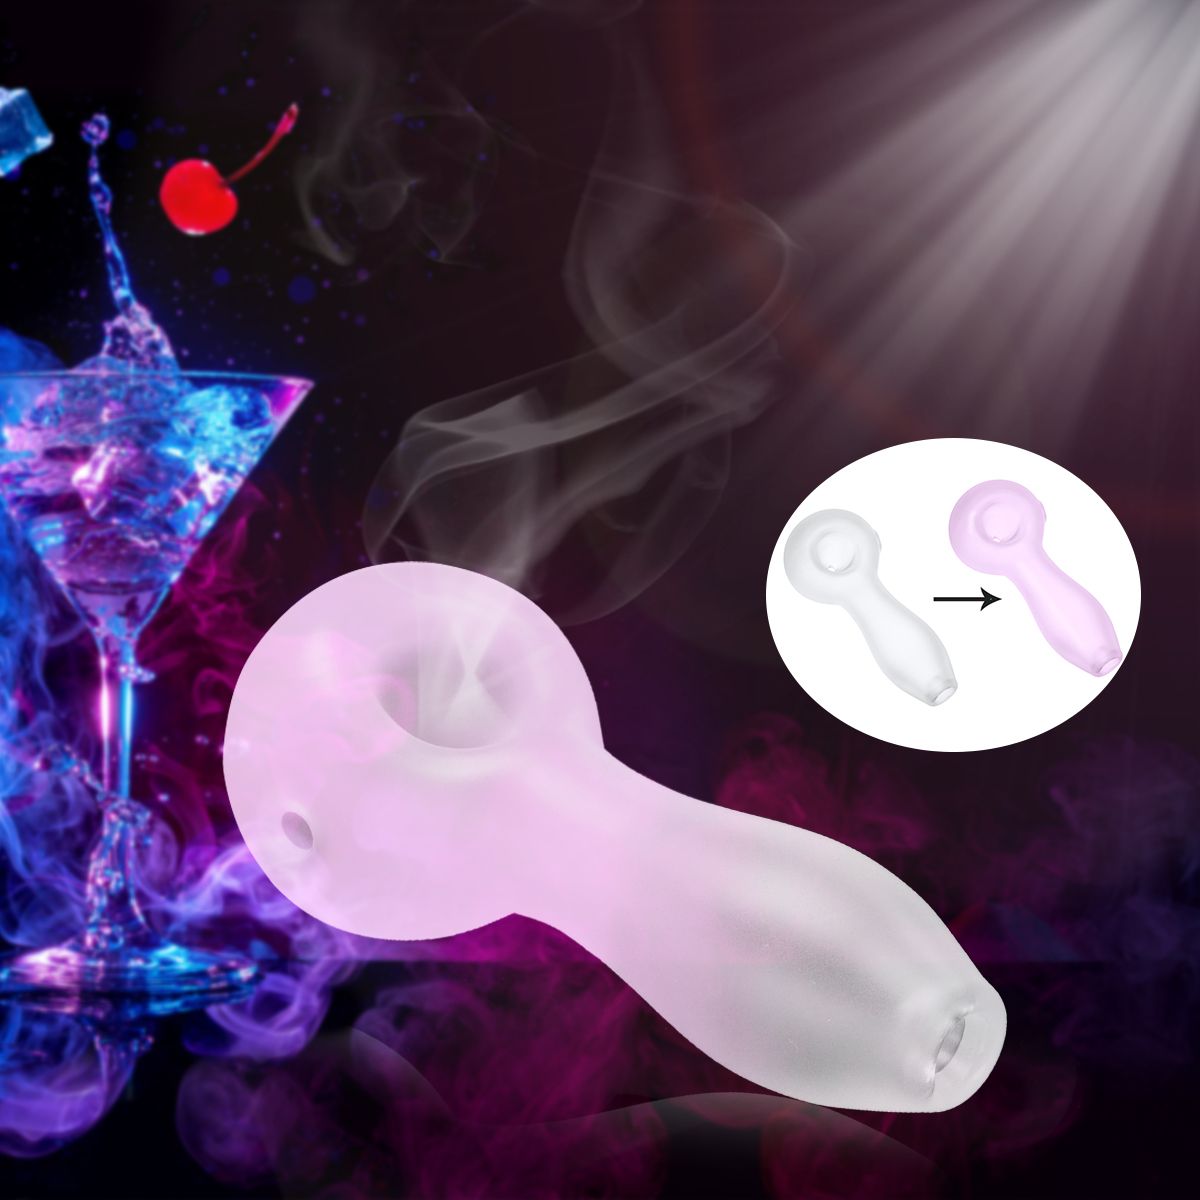 3-Inch-Portable-Glassware-UVC-Color-Changing-Herb-Holder-Glass-Tube-Hand-Pipe-1523894